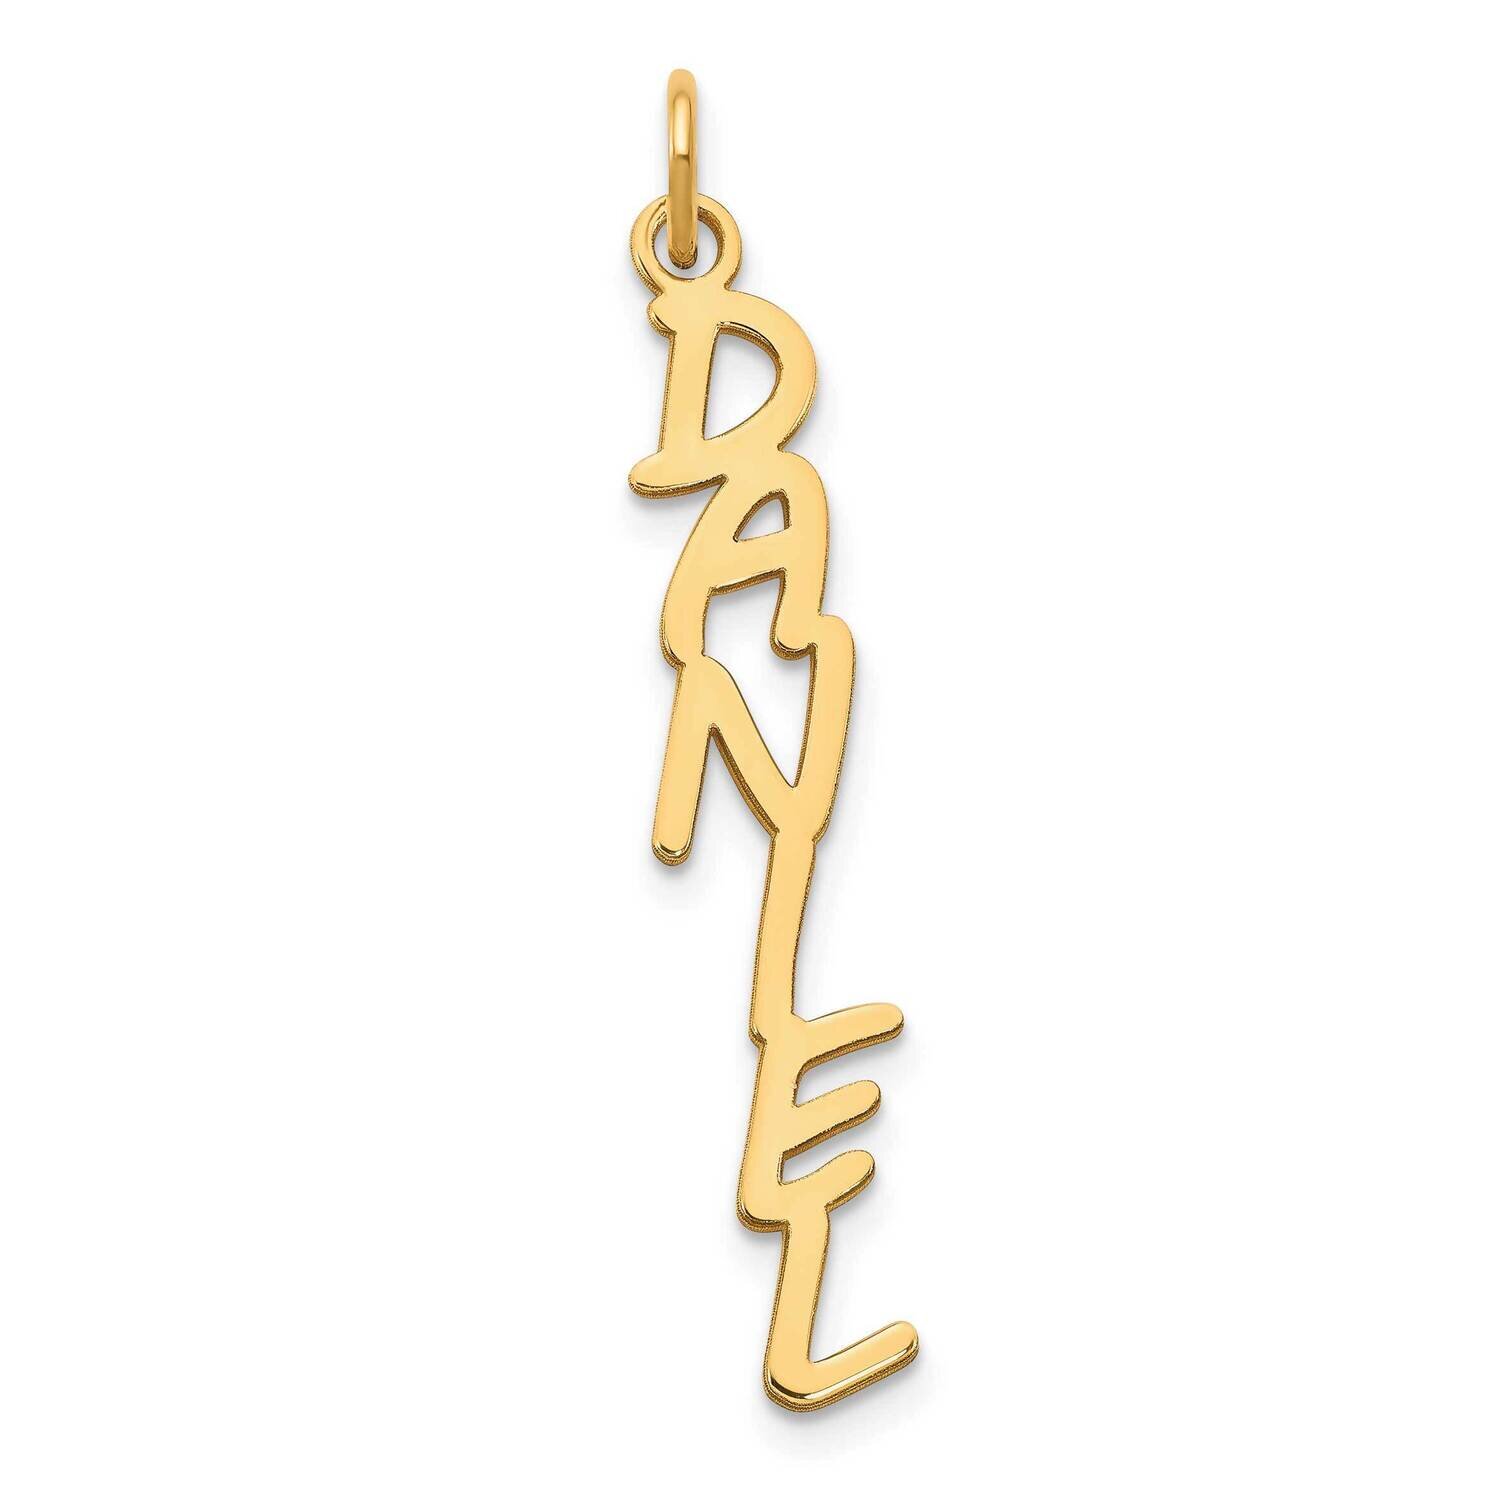 Mv Boli Font Vertical Name Plate Charm Sterling Silver Gold-plated XNA1174GP